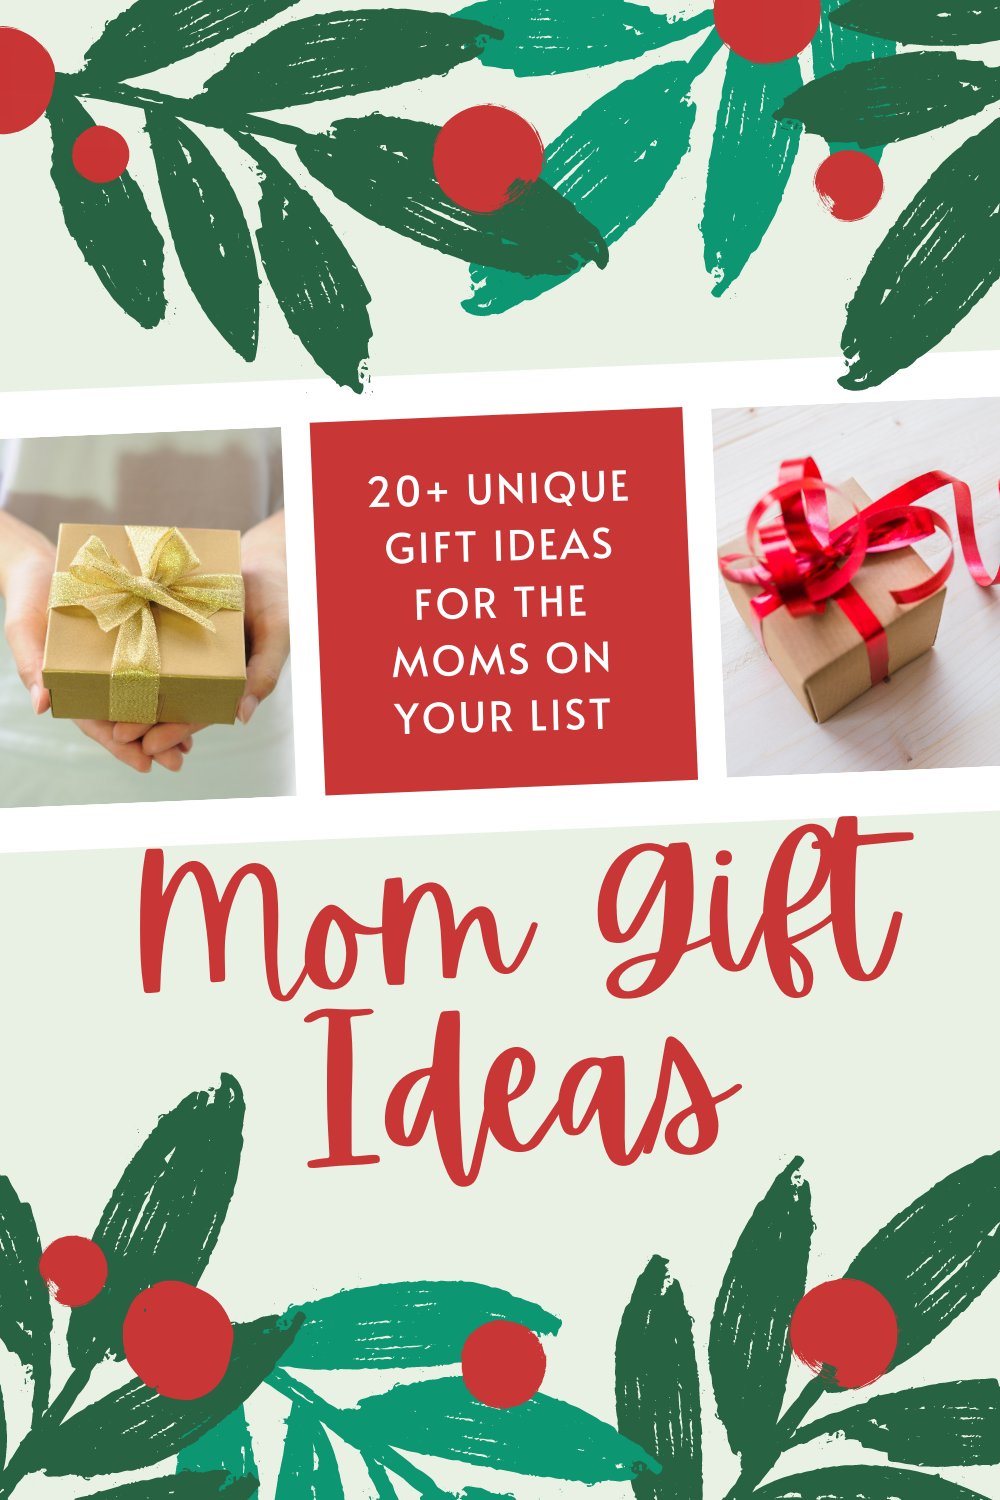 20+ Unique Gift Ideas Mom is Sure to Love | Find the perfect Christmas gift for your mom, grandmother, or wife with this list of unique gift ideas! Some are meaningful, fun, useful, or edible. Also includes the best subscription box ideas. Even if your mom has everything, you'll find the present that is just right! #christmasgifts #giftideas #giftideasforher #giftideasformom #uniquegifts #fungiftideas #thoughtfulgifts #christmas2020 #bestgiftideas